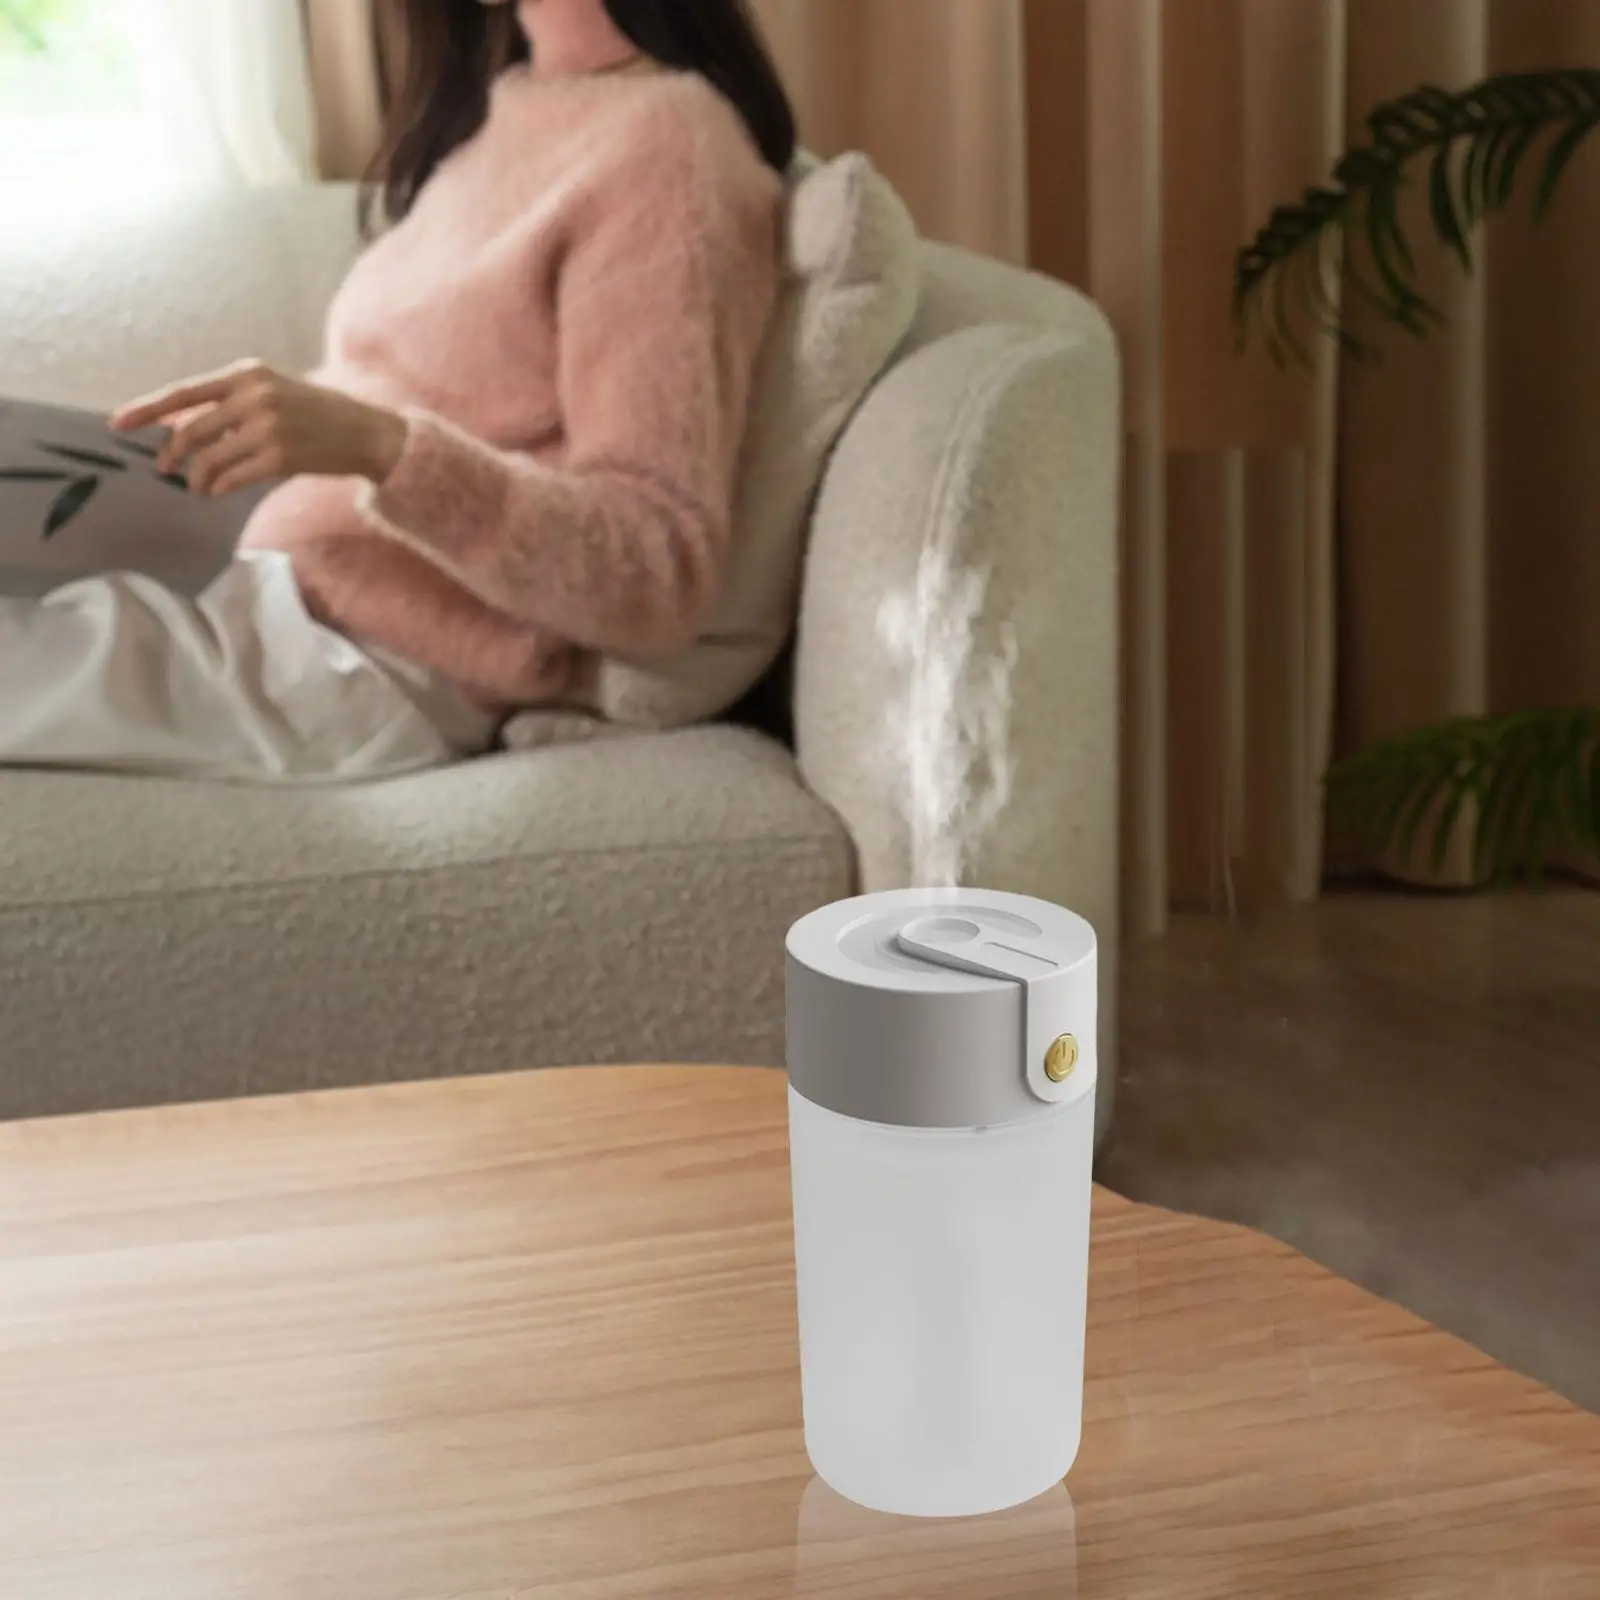 Small Mist Humidifier Quiet Portable Car Humidifier Diffuser Desktop Humidifier for Baby Room Study Room Car Bedroom Travel